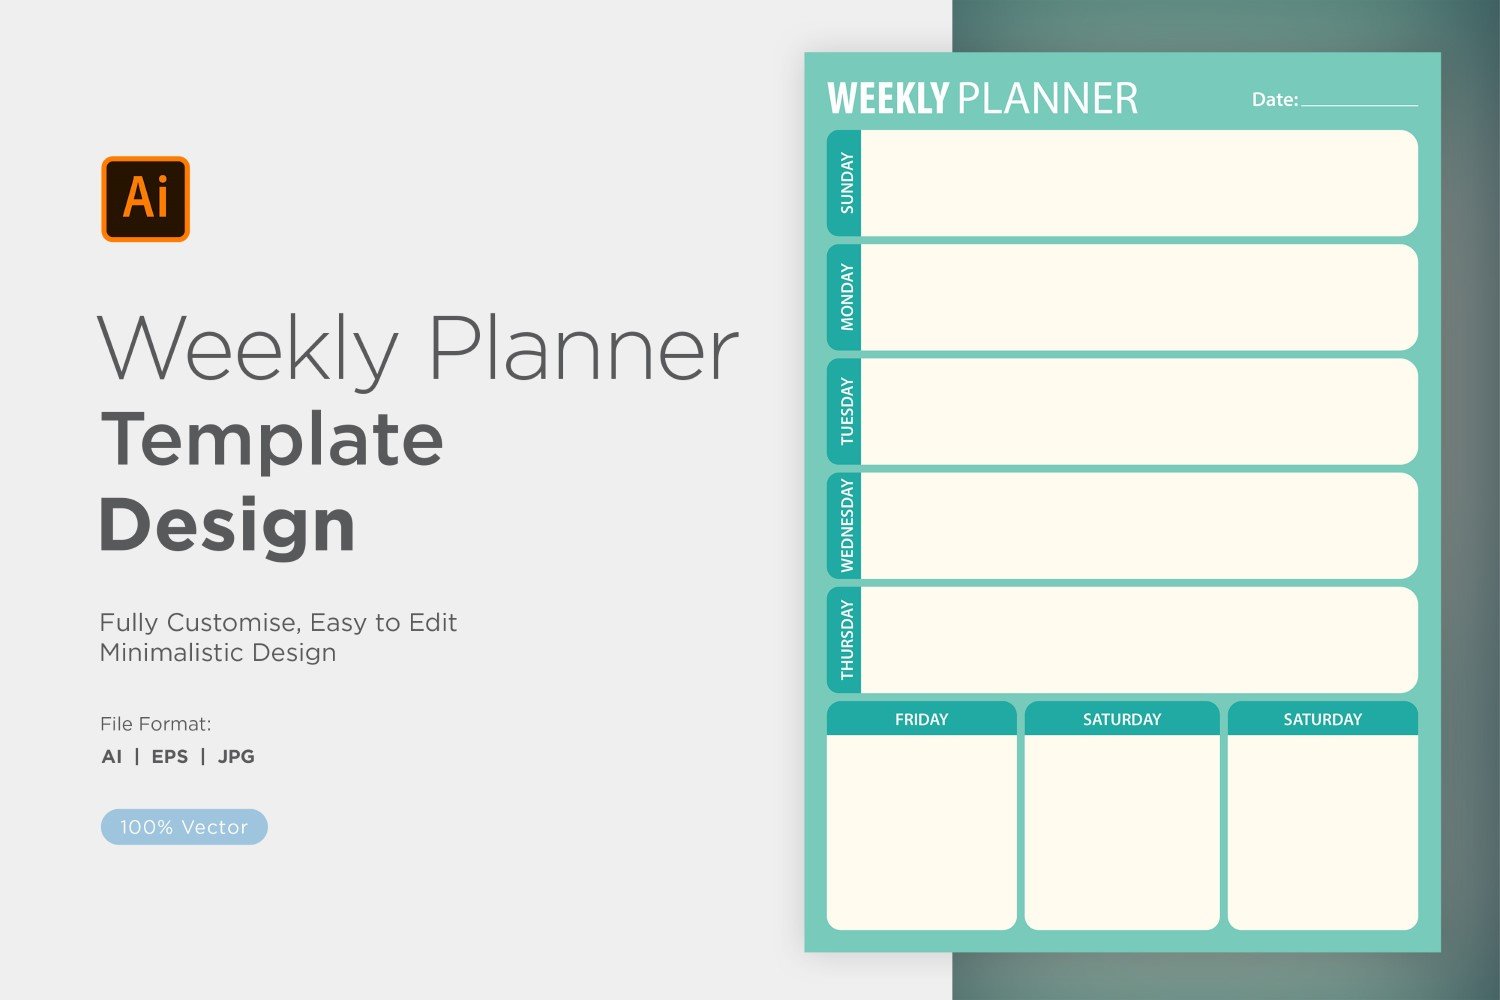 Kit Graphique #357822 Weekly Planner Divers Modles Web - Logo template Preview